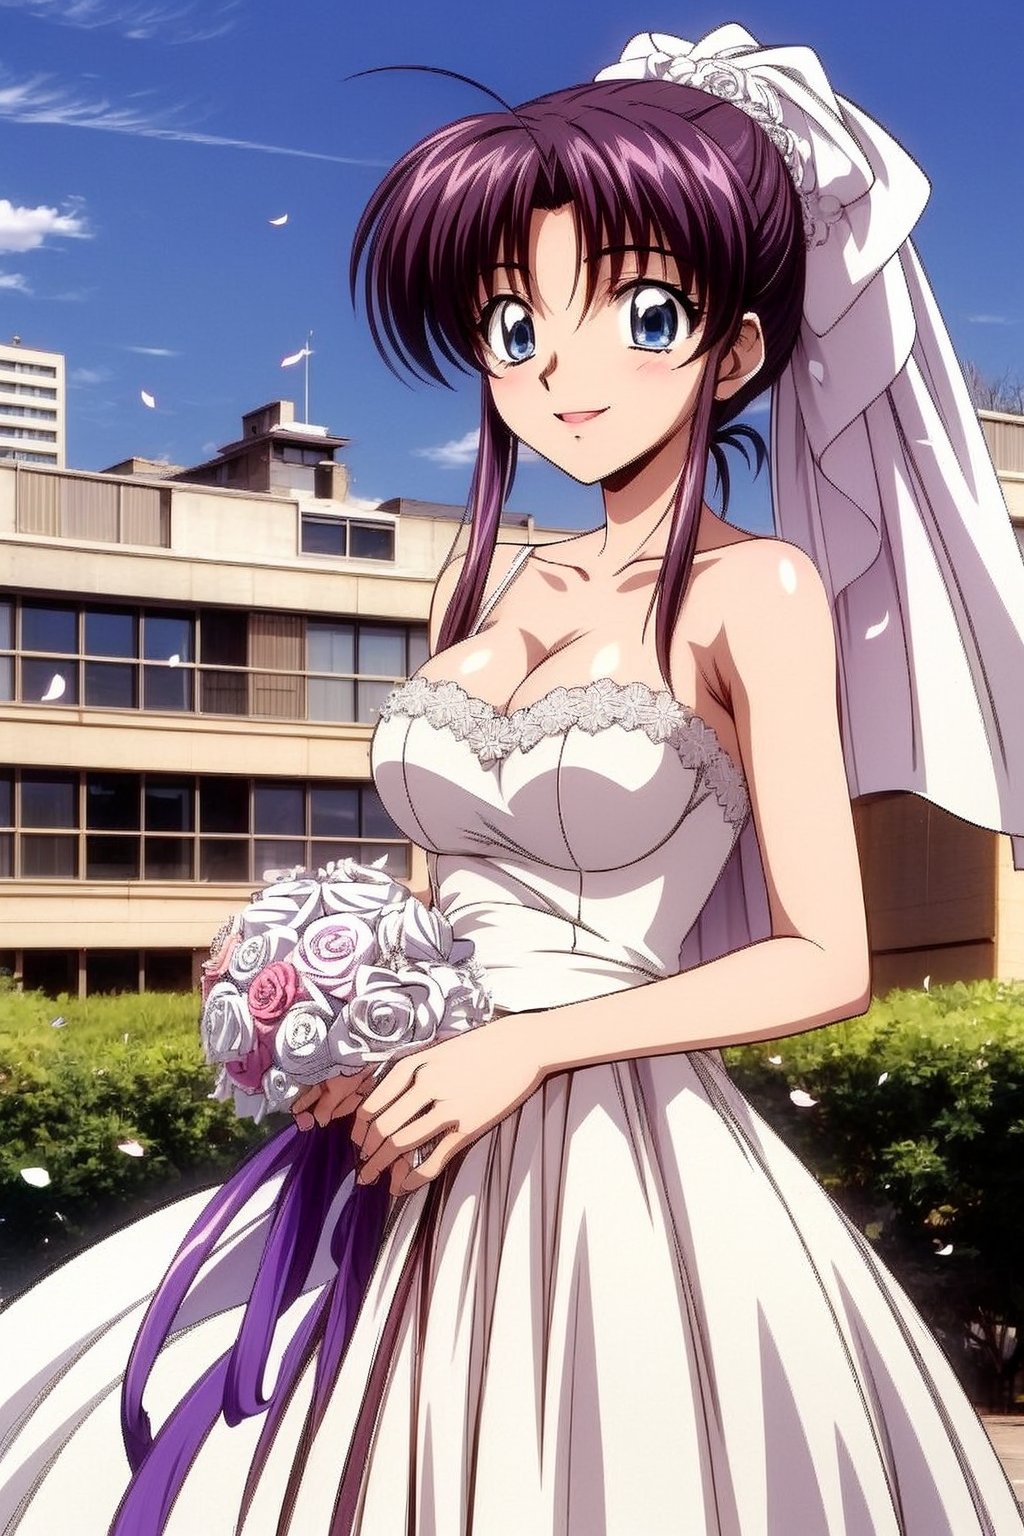 Kaimya kaoru 1996,beautiful 20 year old anime girl with: athletic body, long legs, (properly proportioned female body) , medium bust, blue eyes, black long hair tied in a ponytail; wearing a wedding dress with lace, seethrought lace veil; smiling shyly, flowers in the hands; stop in half the city; in high quality, ,lace_pattern